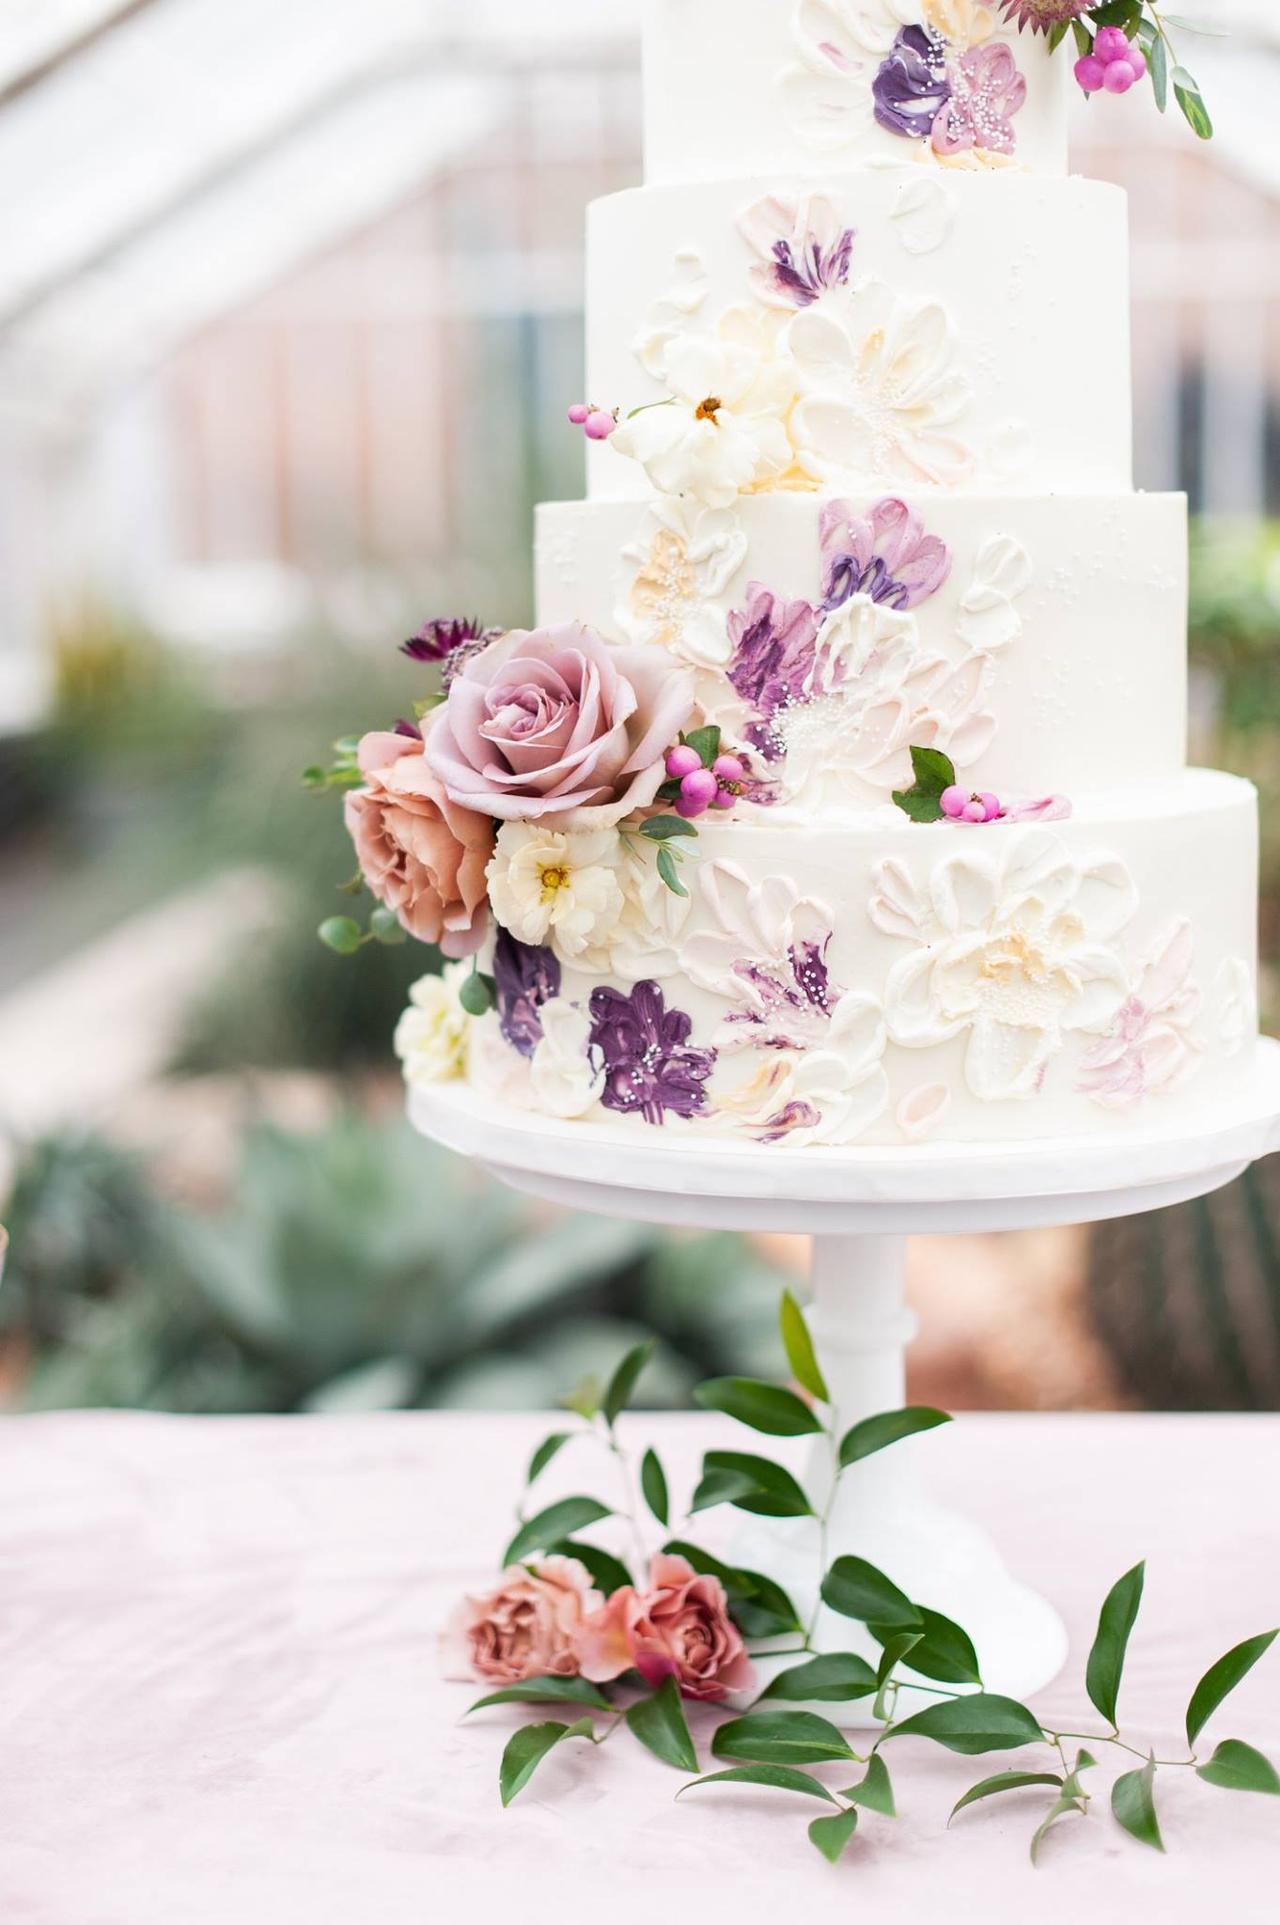 white four-tier wedding cake decorated with hand-painted buttercream flowers and fresh roses